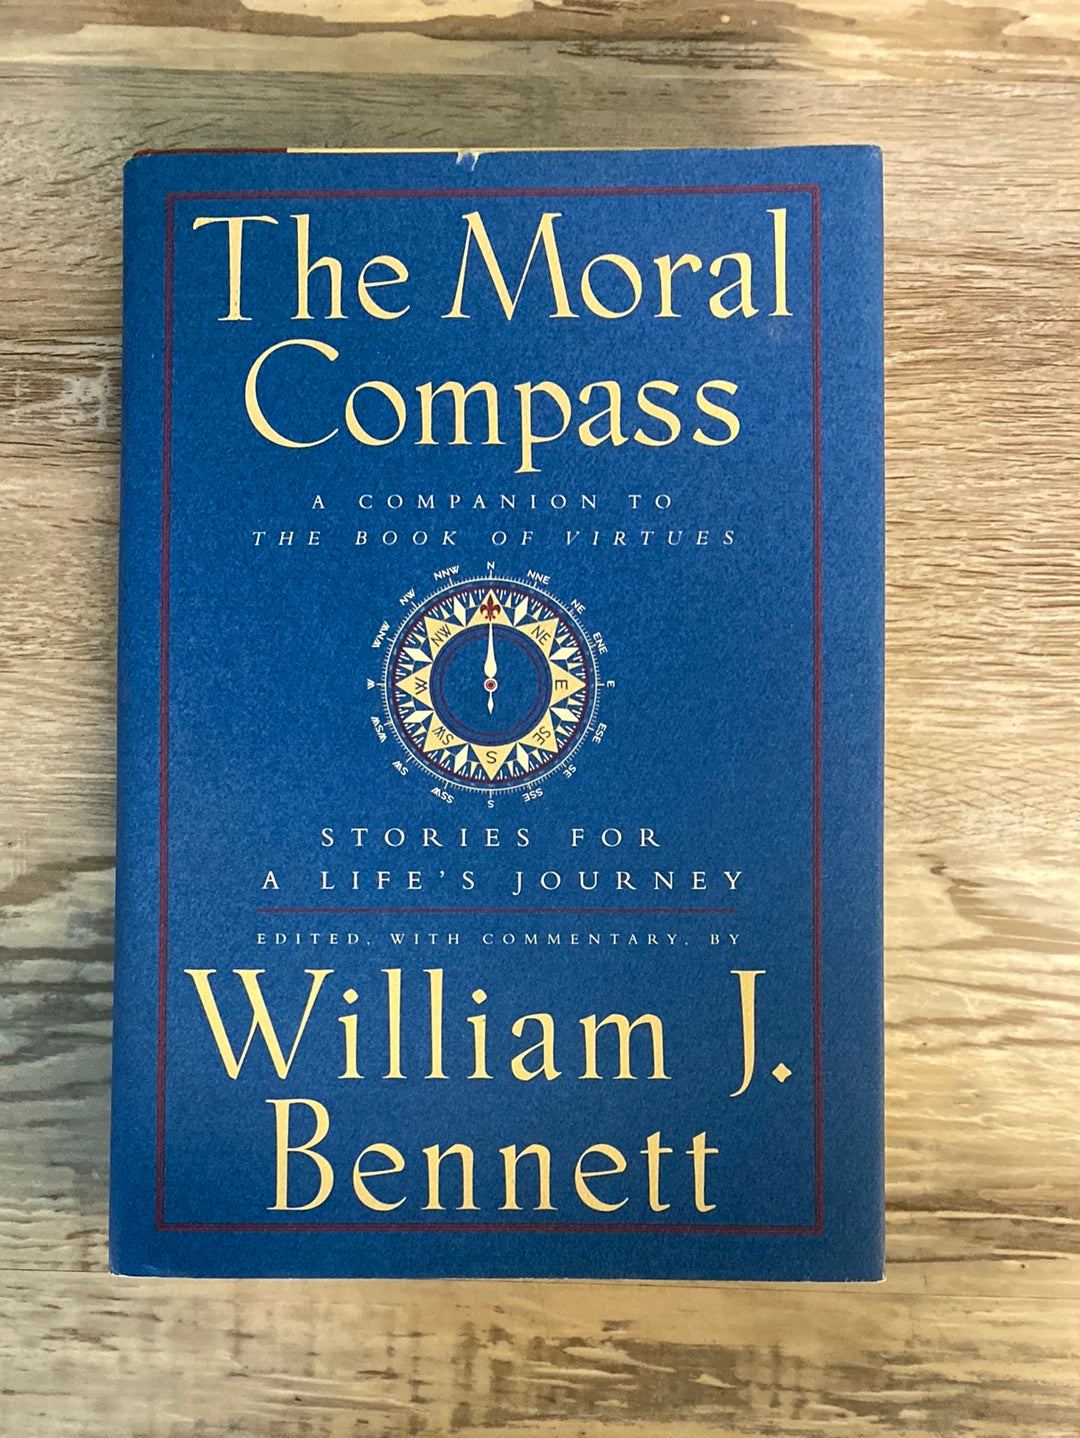 The Moral Compass by William J. Bennett